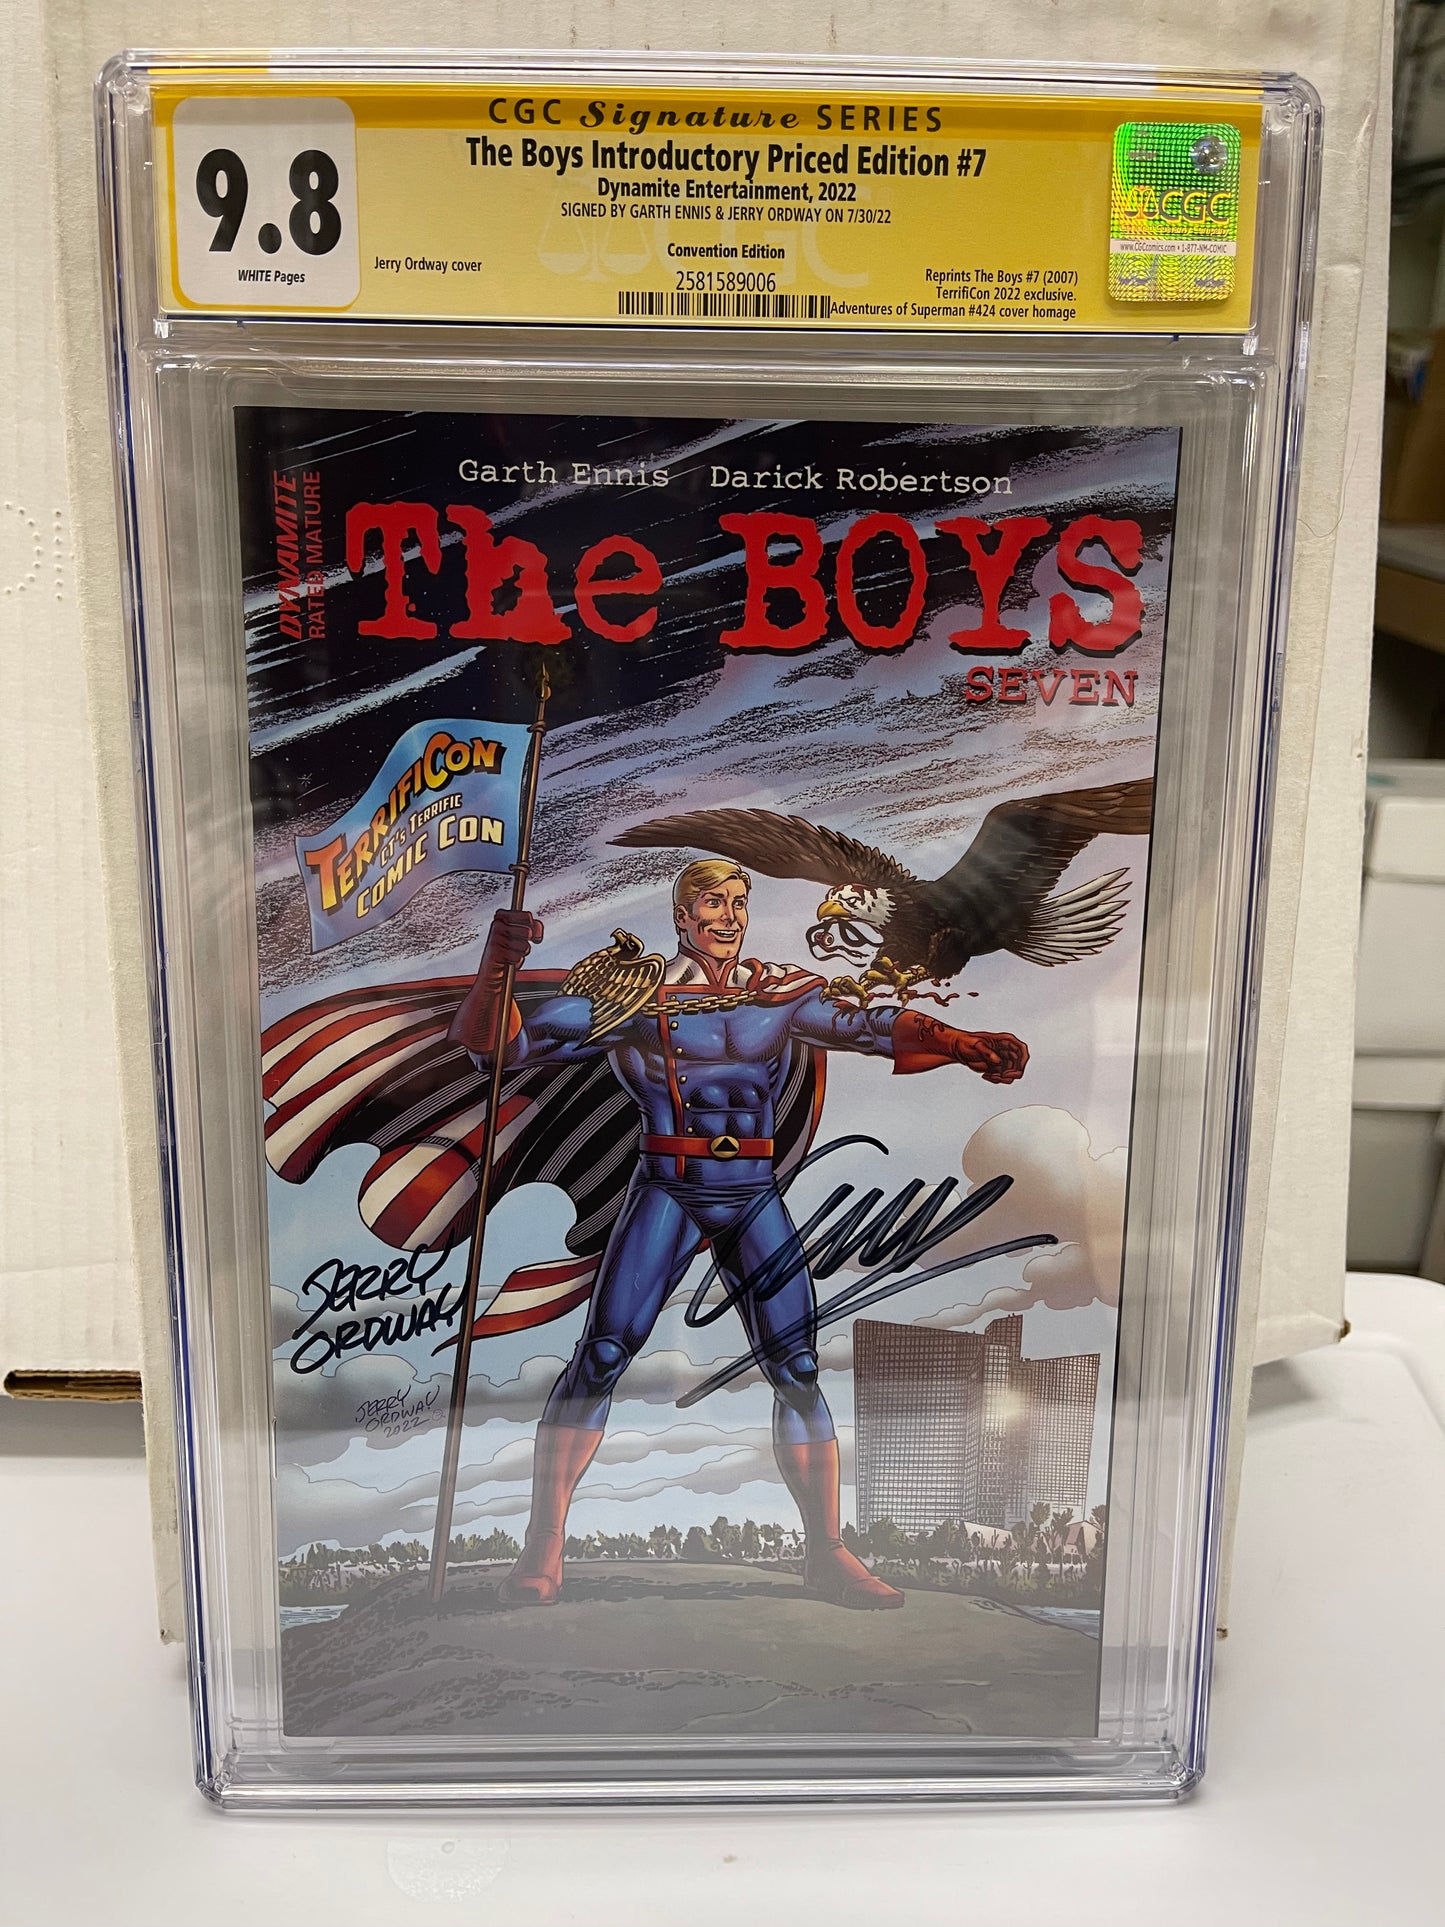 The Boys Indrotuctory Priced Edition #7 Terrificon Exclusive Variant CGC Signature Series - 9.8 (Signed by Jerry Conway/Garth En